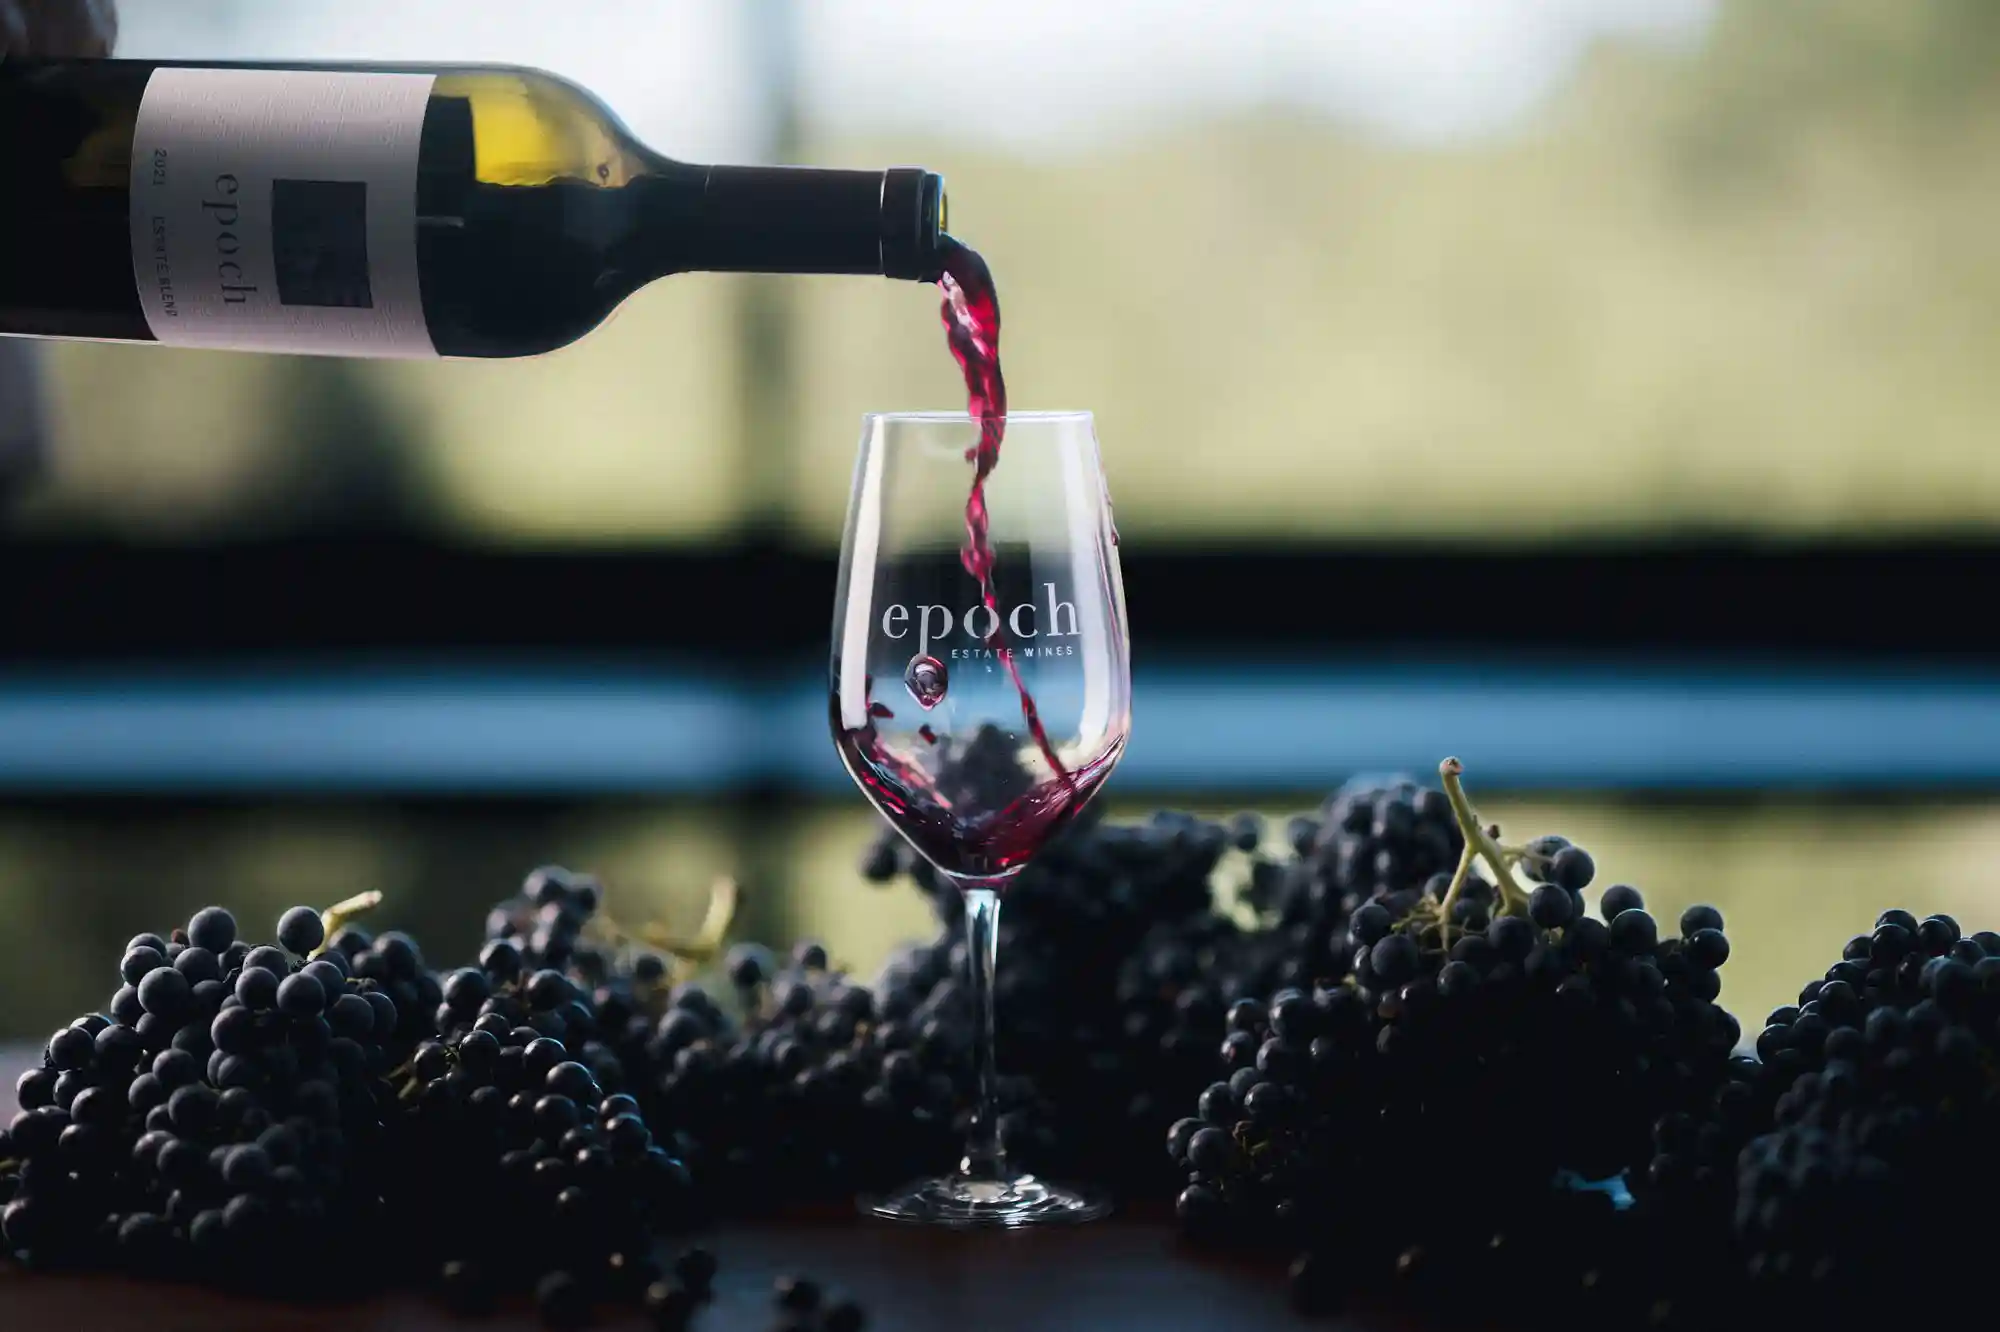 Bottle of Epoch wine being poured into a glass, surrounded by grapes